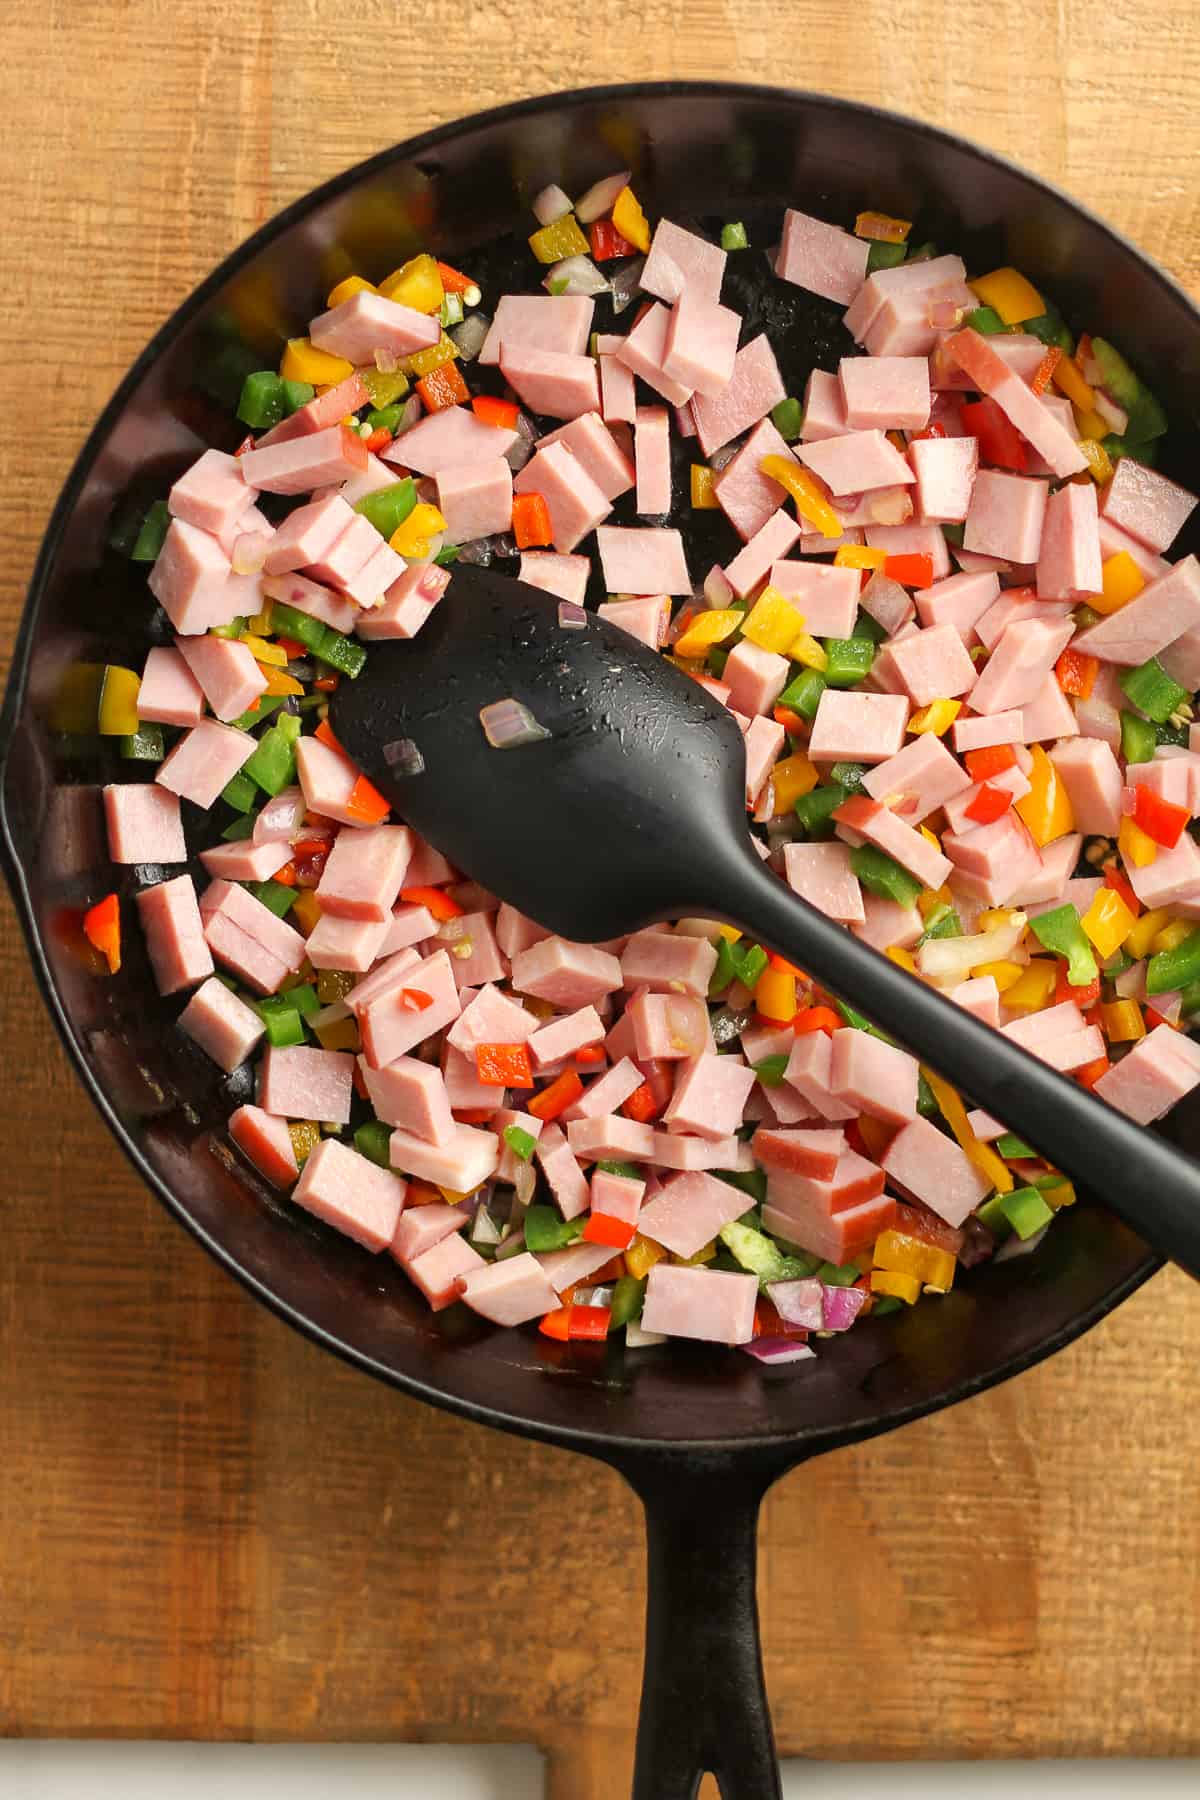 A skillet with the sautéed veggies and ham.